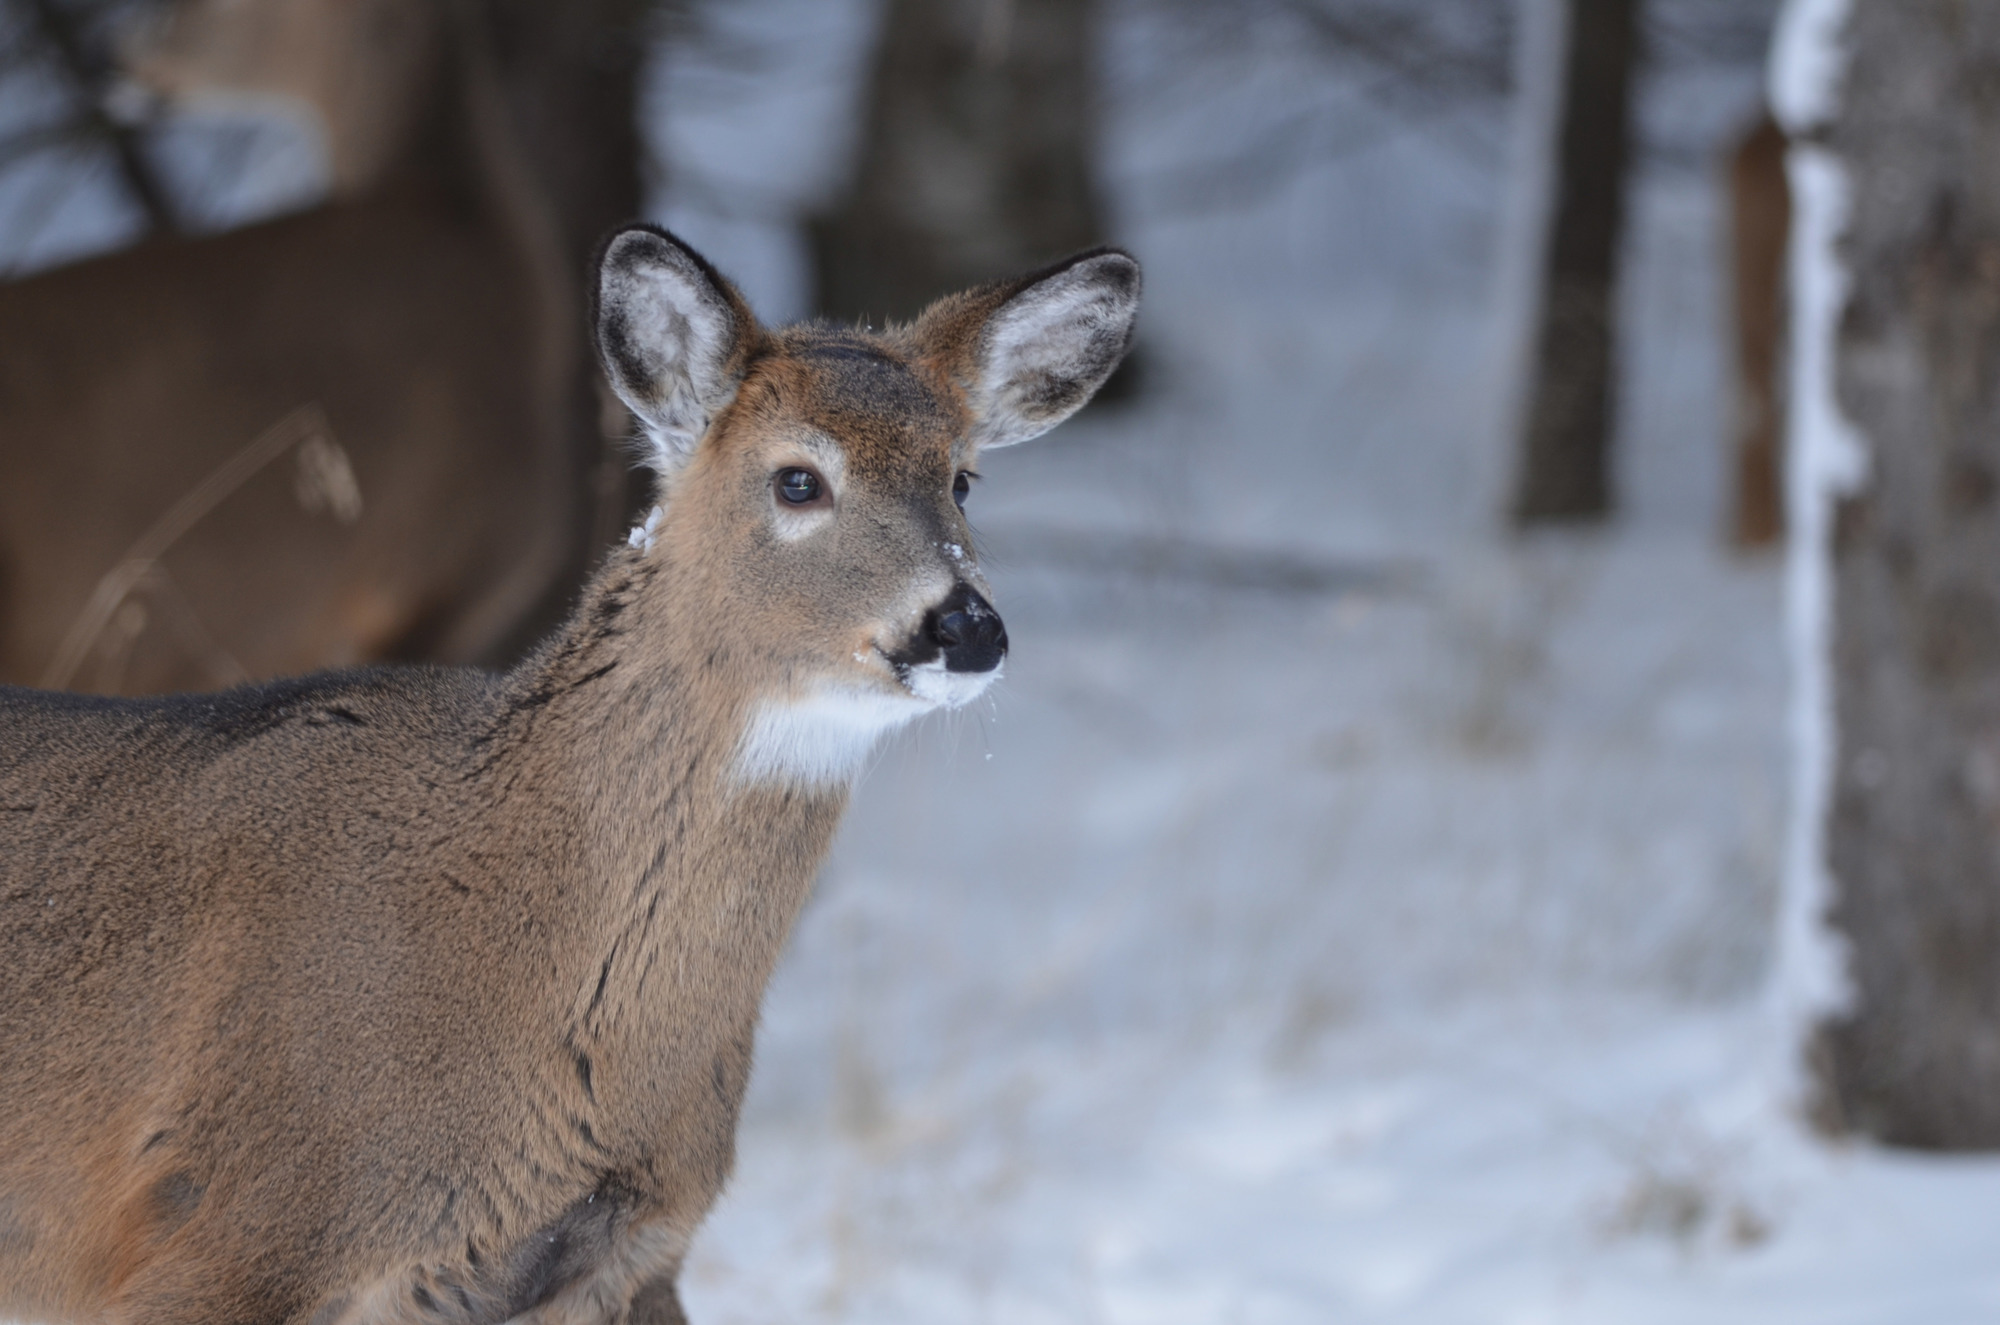 White-tailed deer are the subject of a new multi-year study by the Michigan DNR to determine seasonal migration and abundance in the U.P.